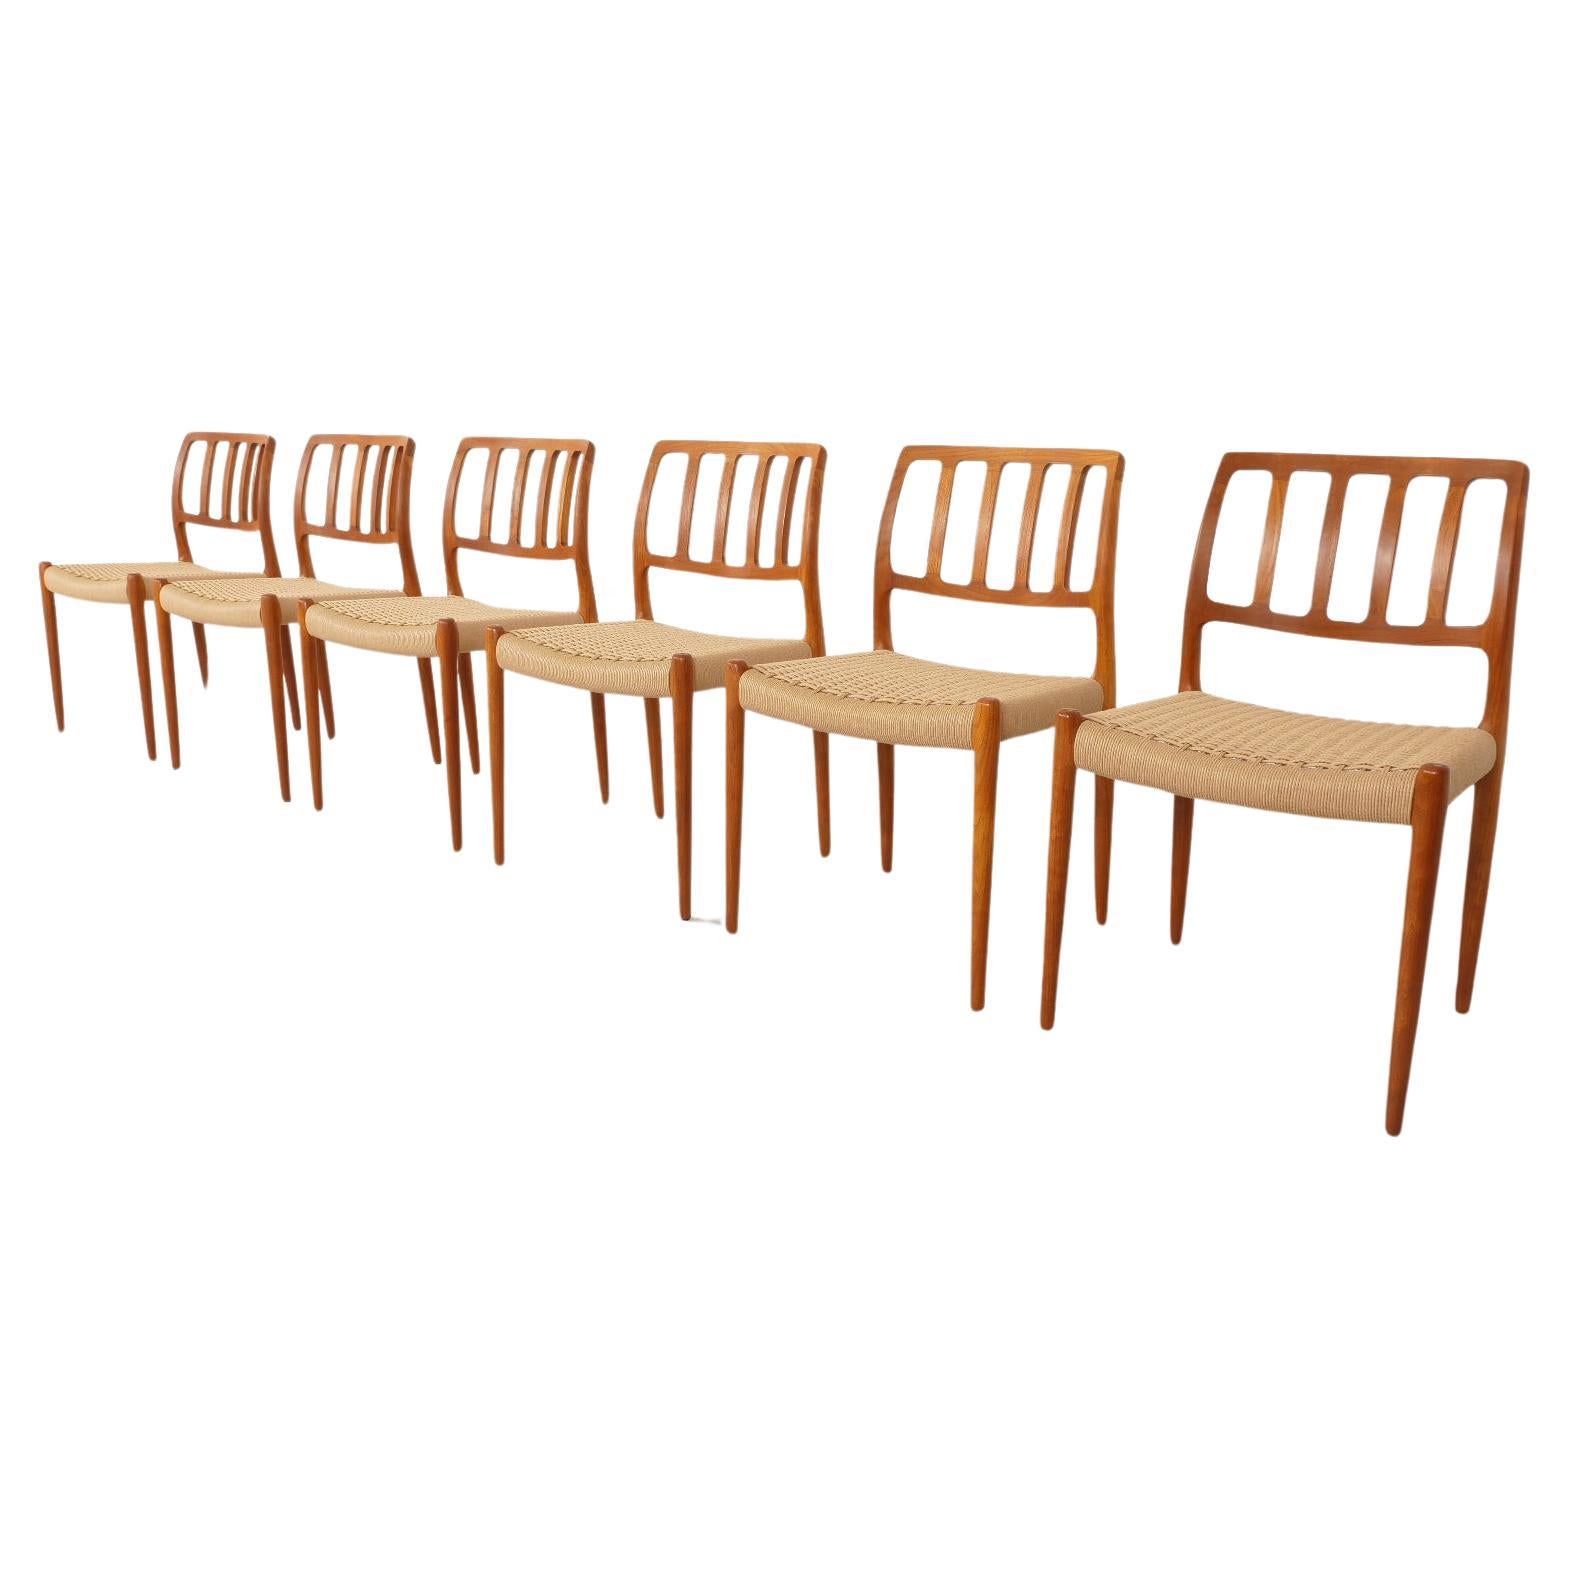 6 x Niels Otto Møller dining chairs  Model 83  Papercord  Teak  Restored For Sale